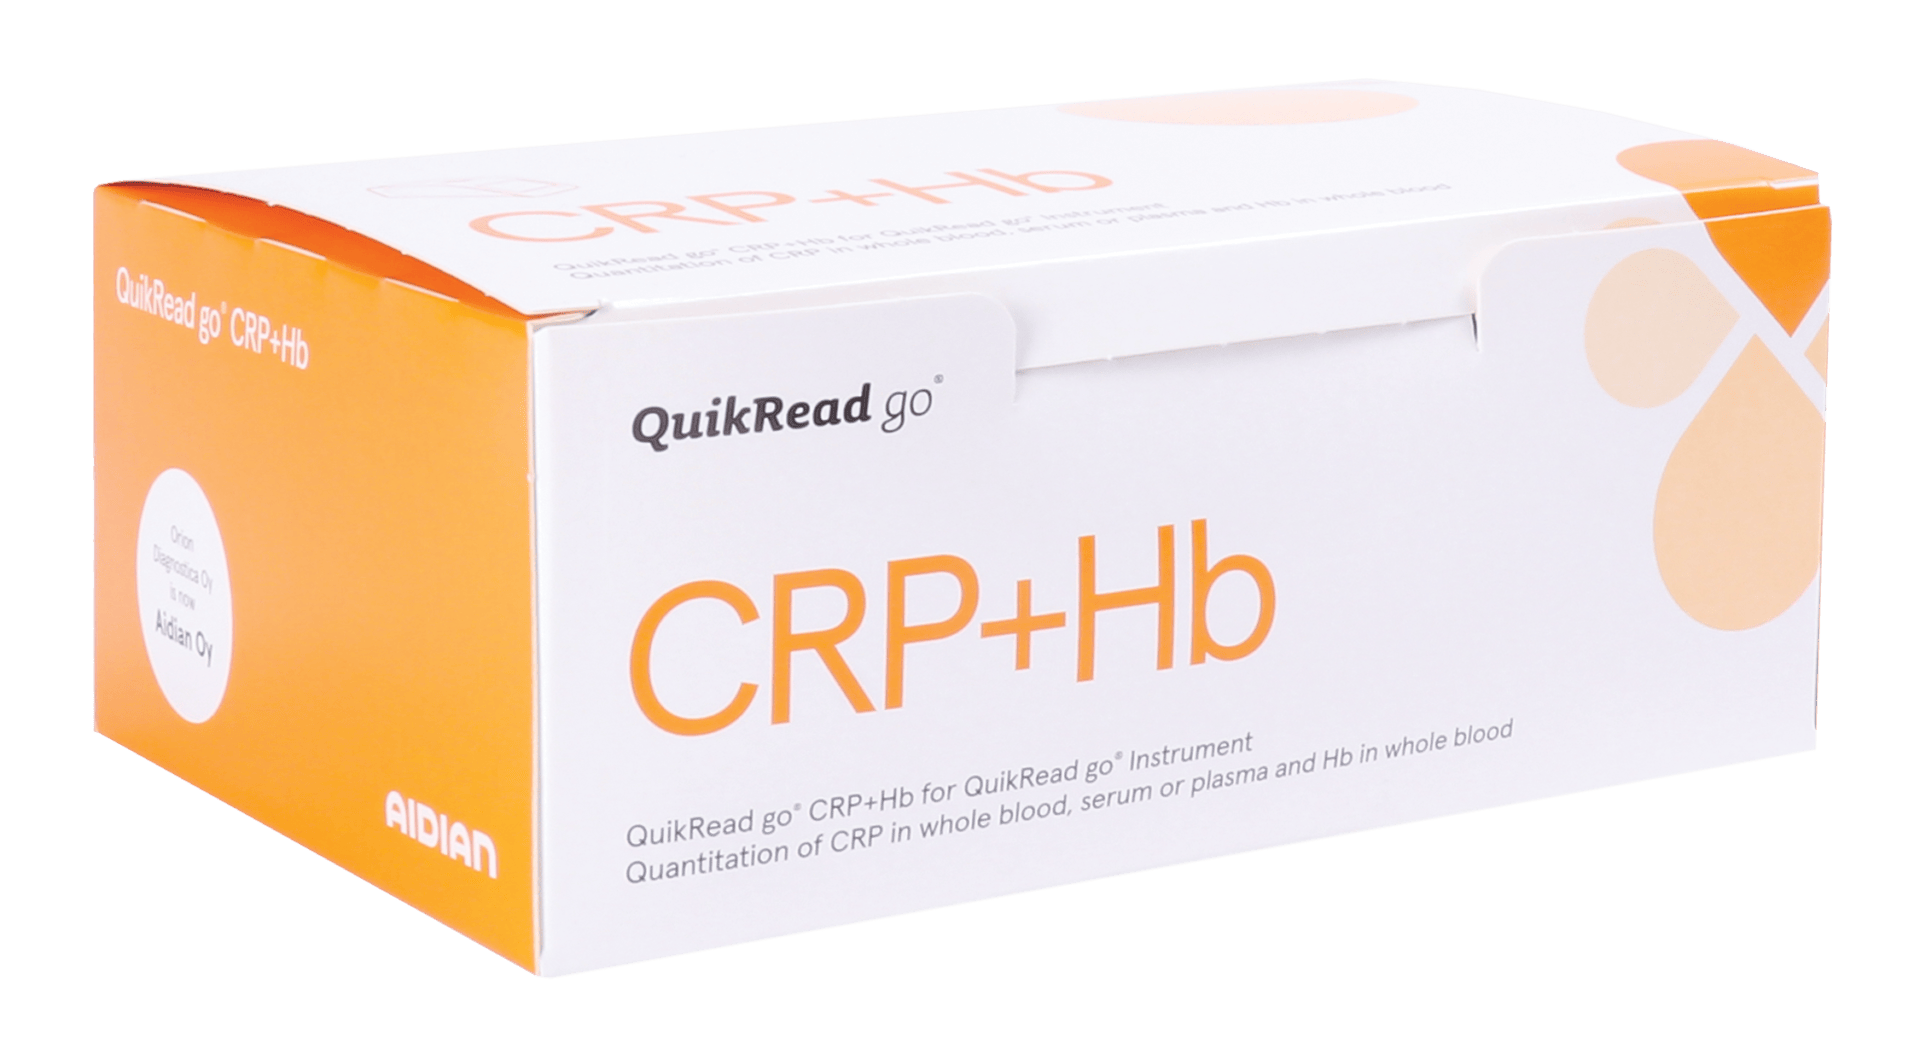 QuikRead go CRP+Hb tests